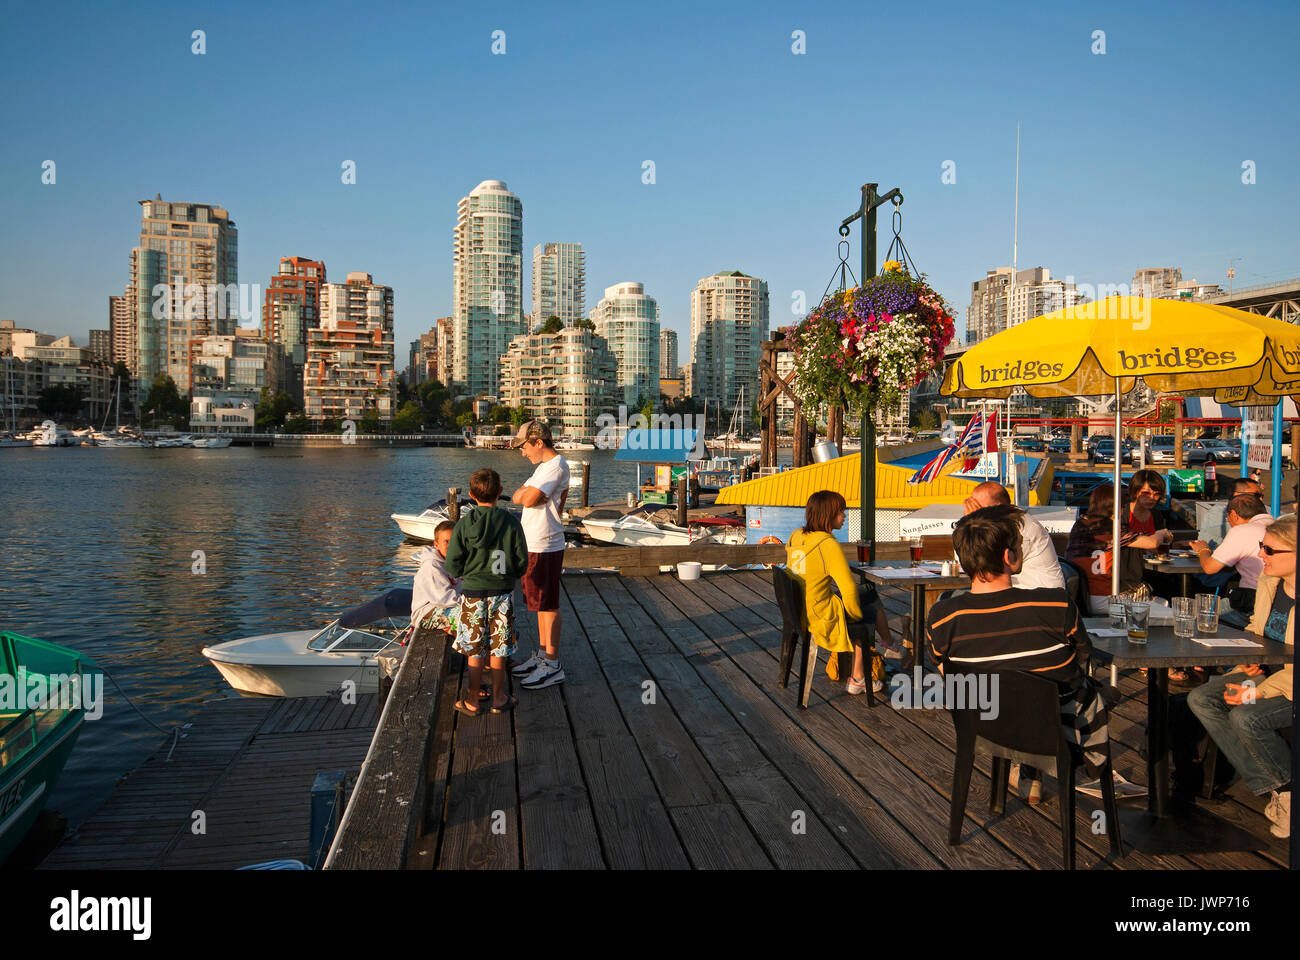 People dining on the terrace of the Bridges Restaurant, Granville Island, skyscrapers in the background, Vancouver, British Columbia, Canada Stock Photo